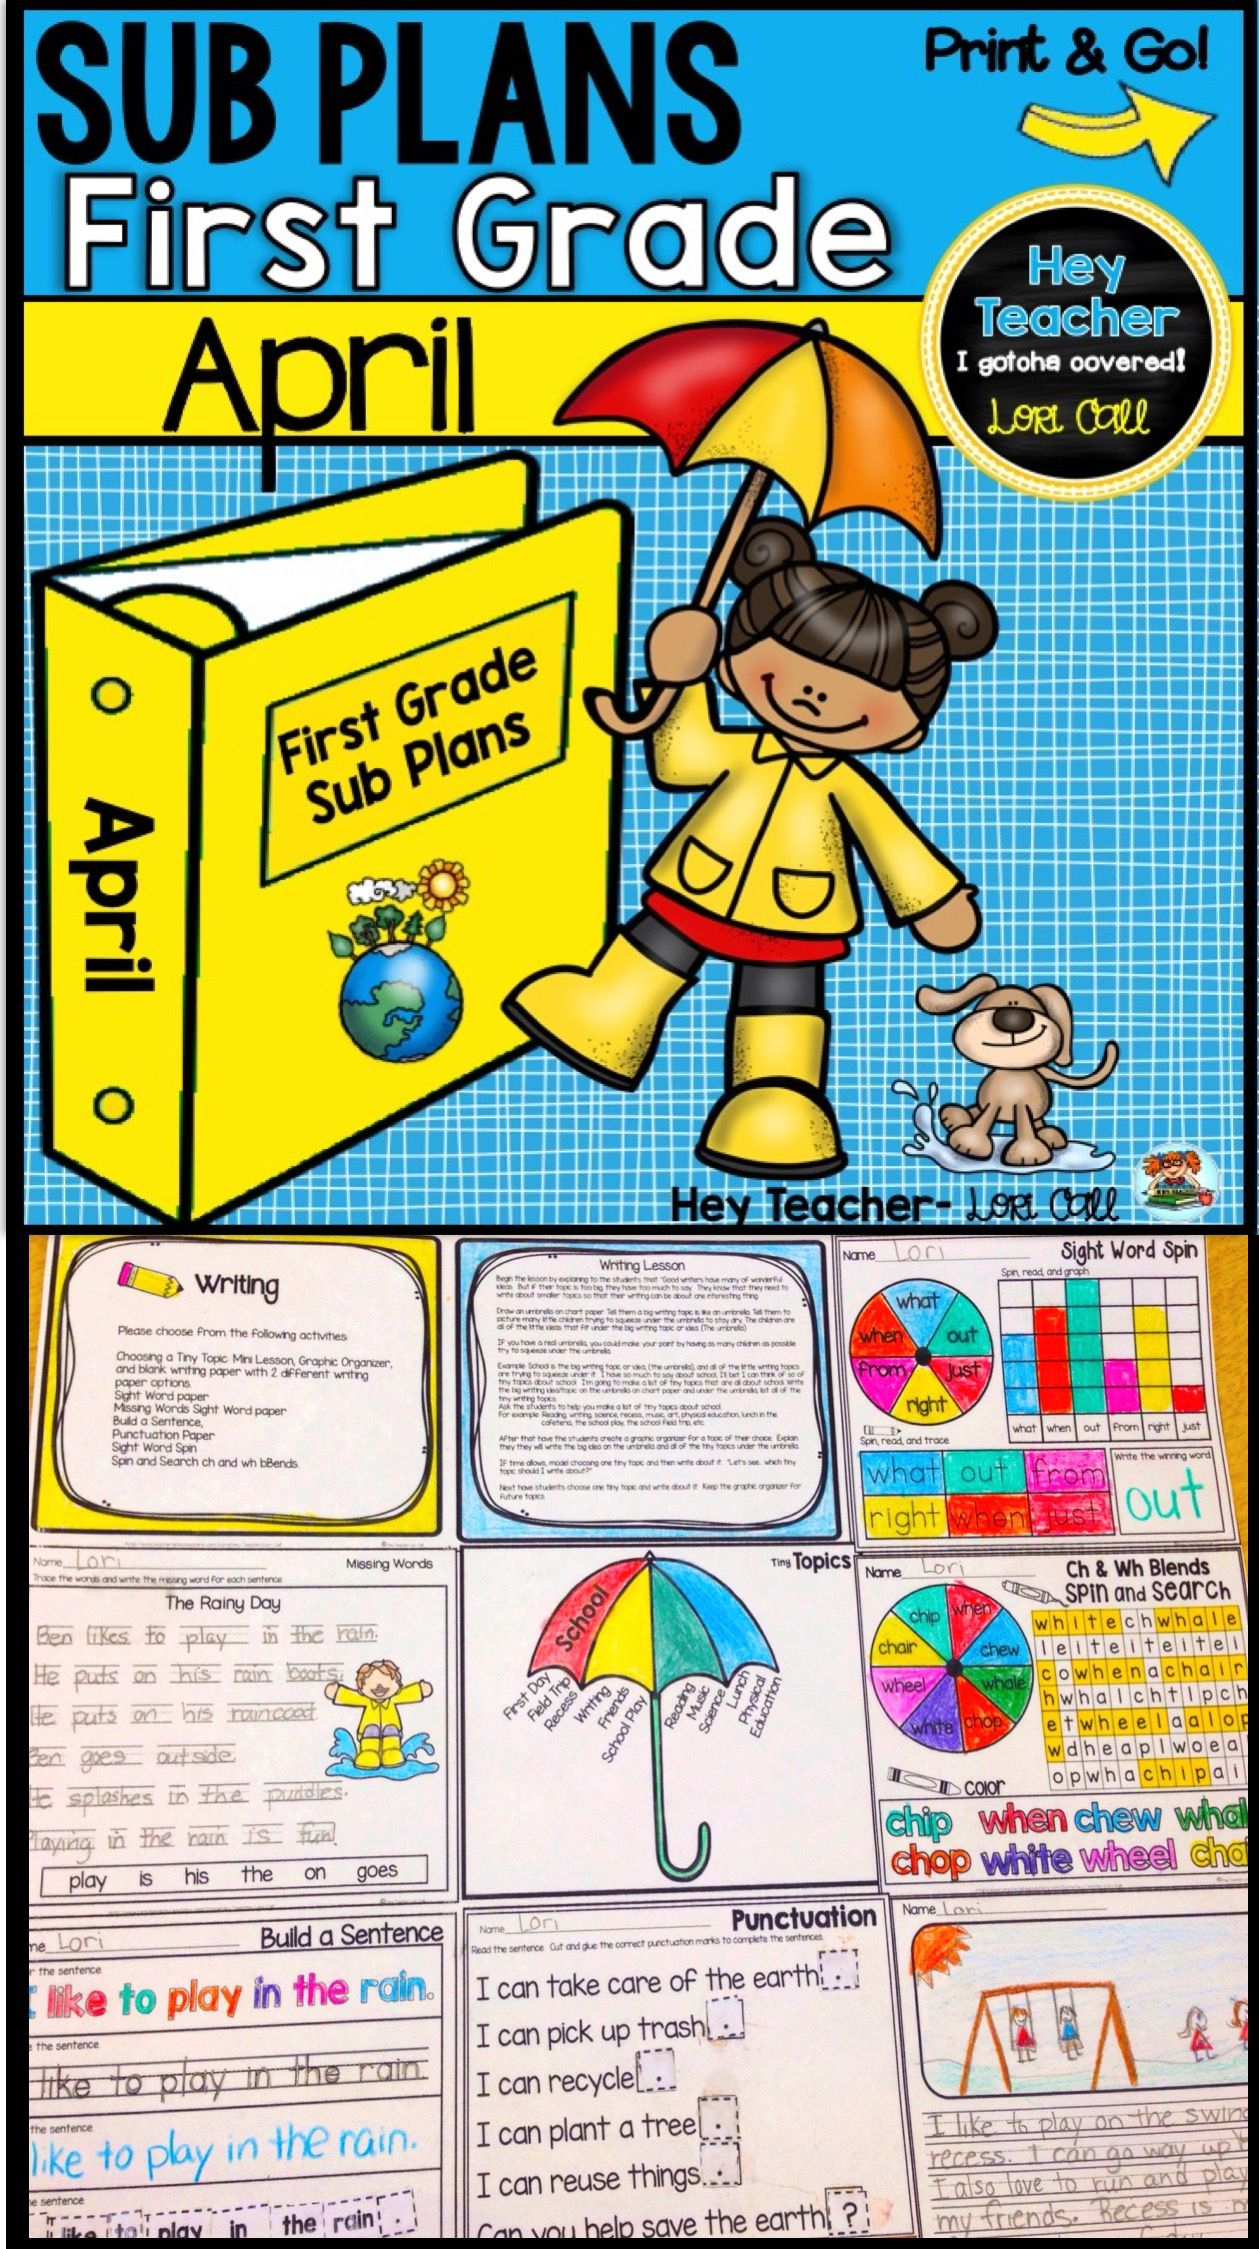 First Grade Sub Plans April-Spring | First Grade Lessons